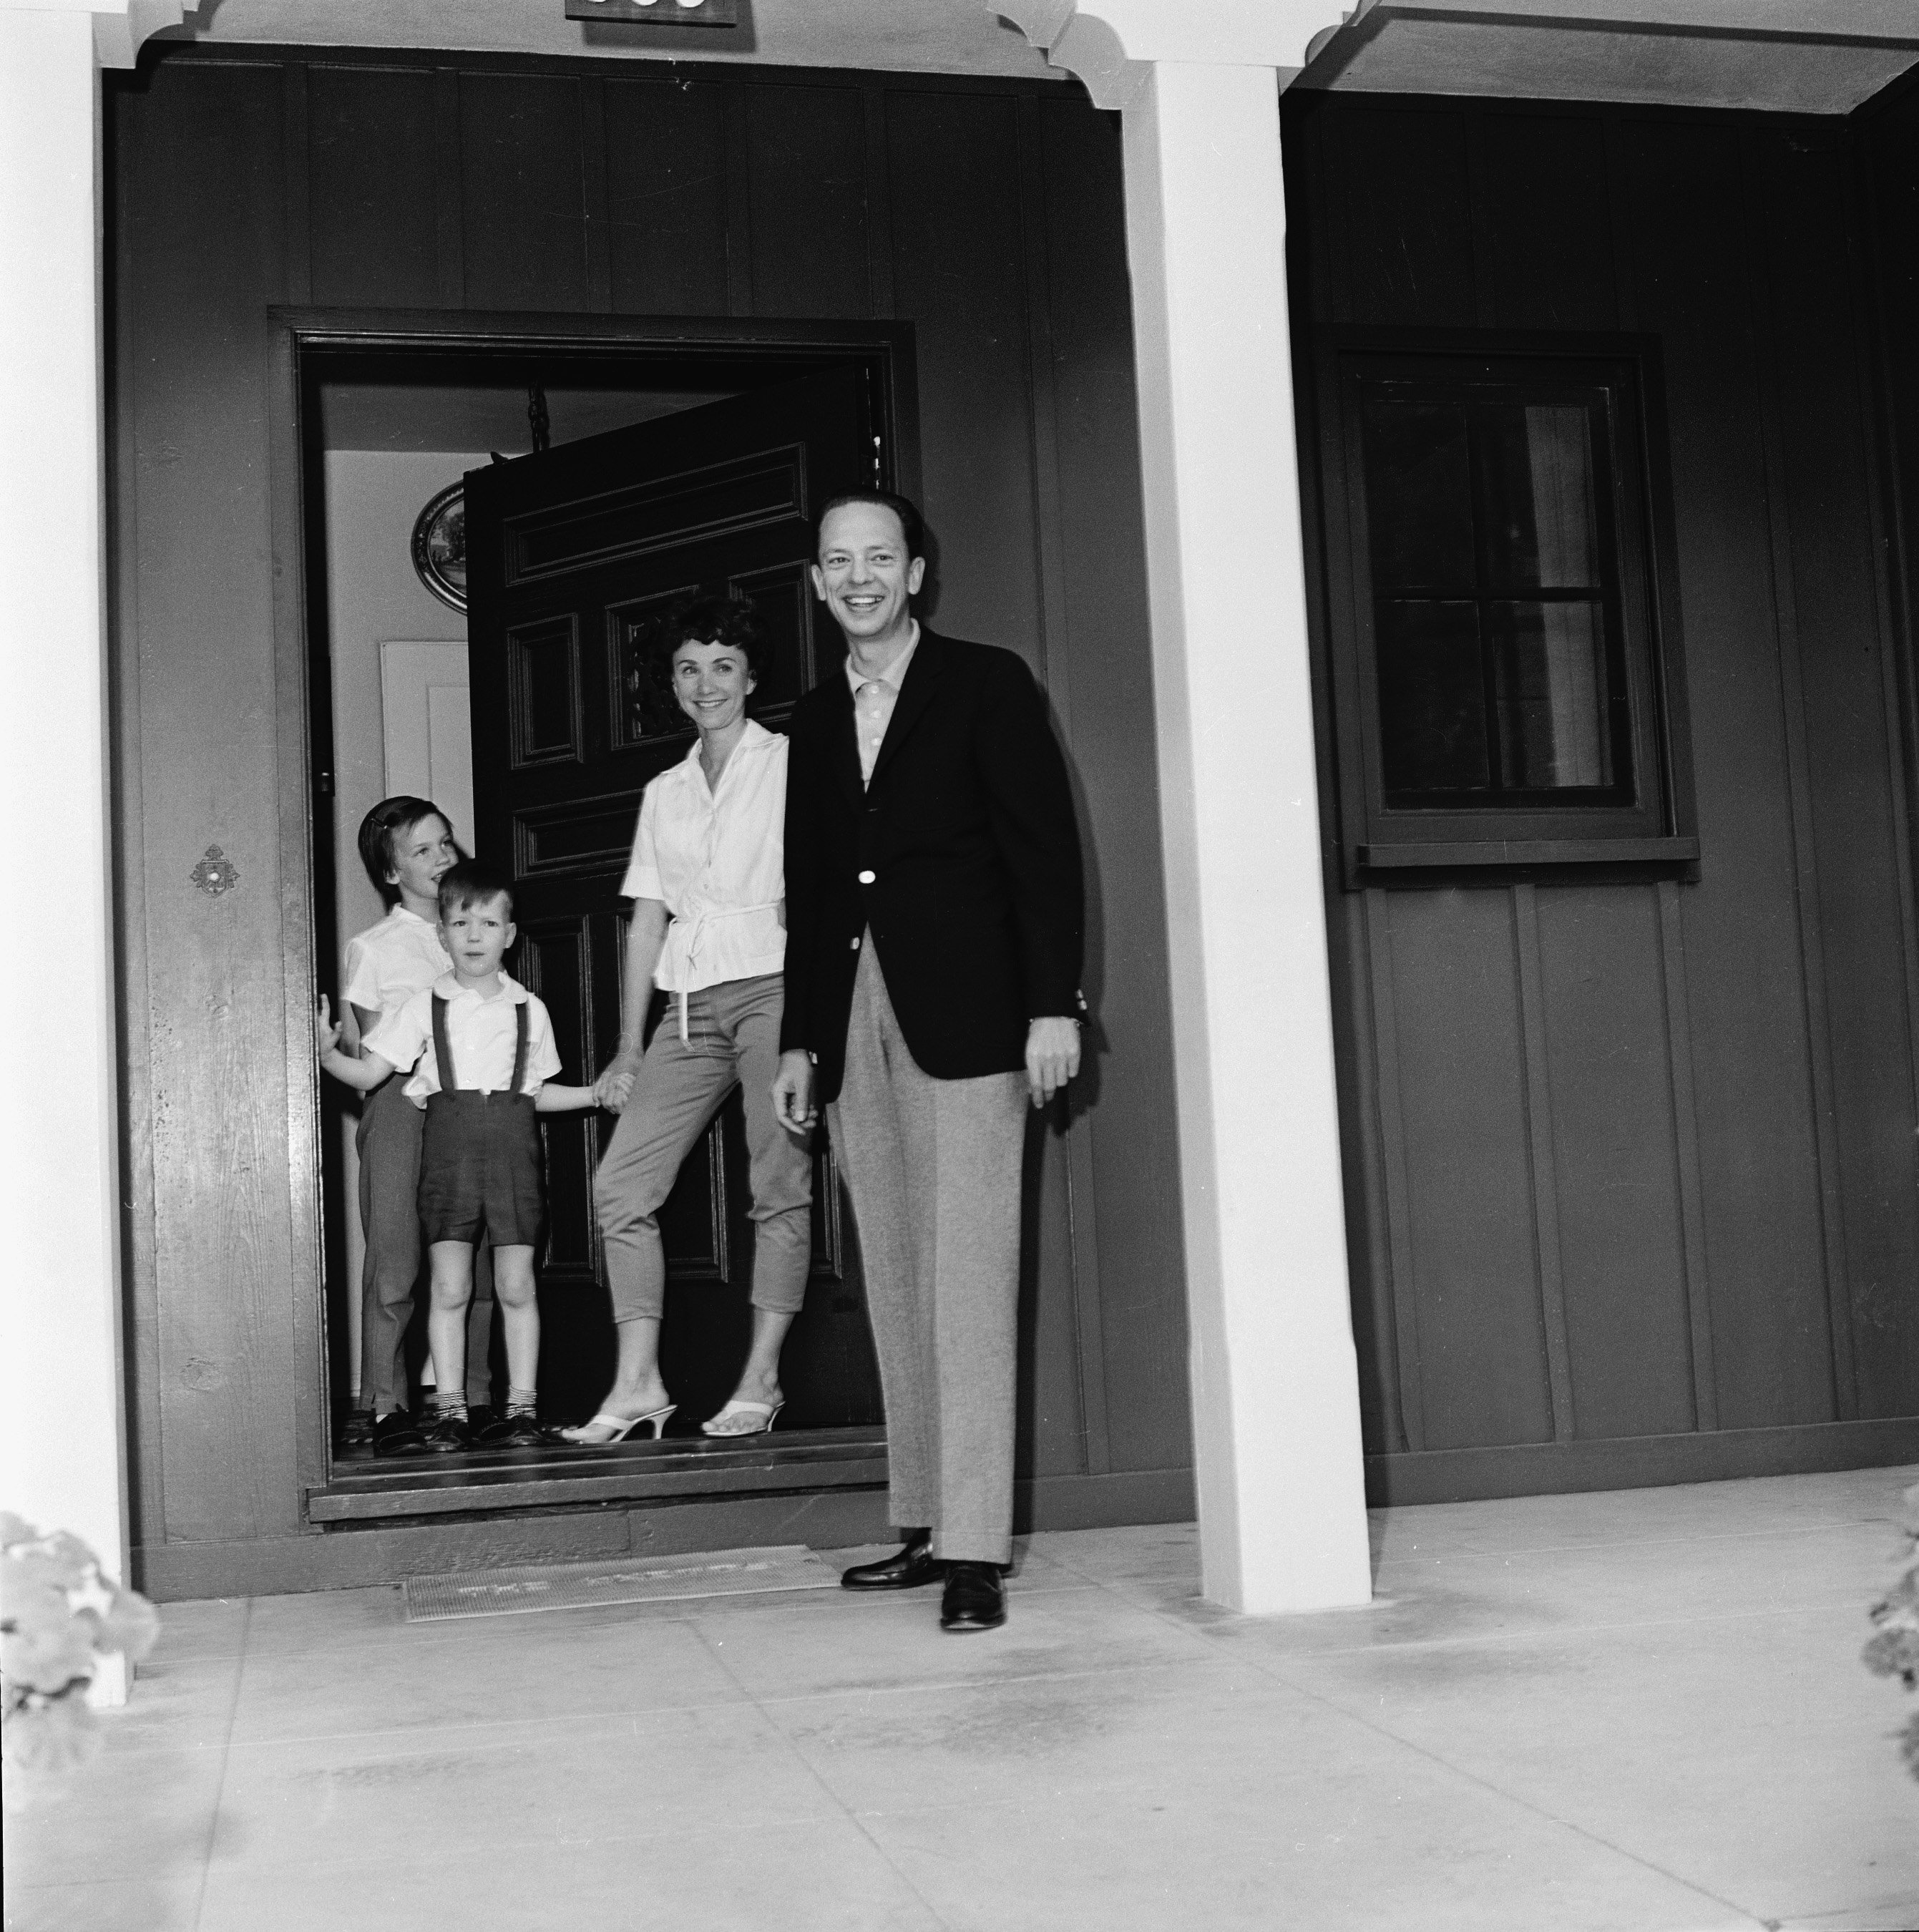 American television actor Don Knotts stands his family on the porch of their home, March 2, 1961. | Source: Getty Images